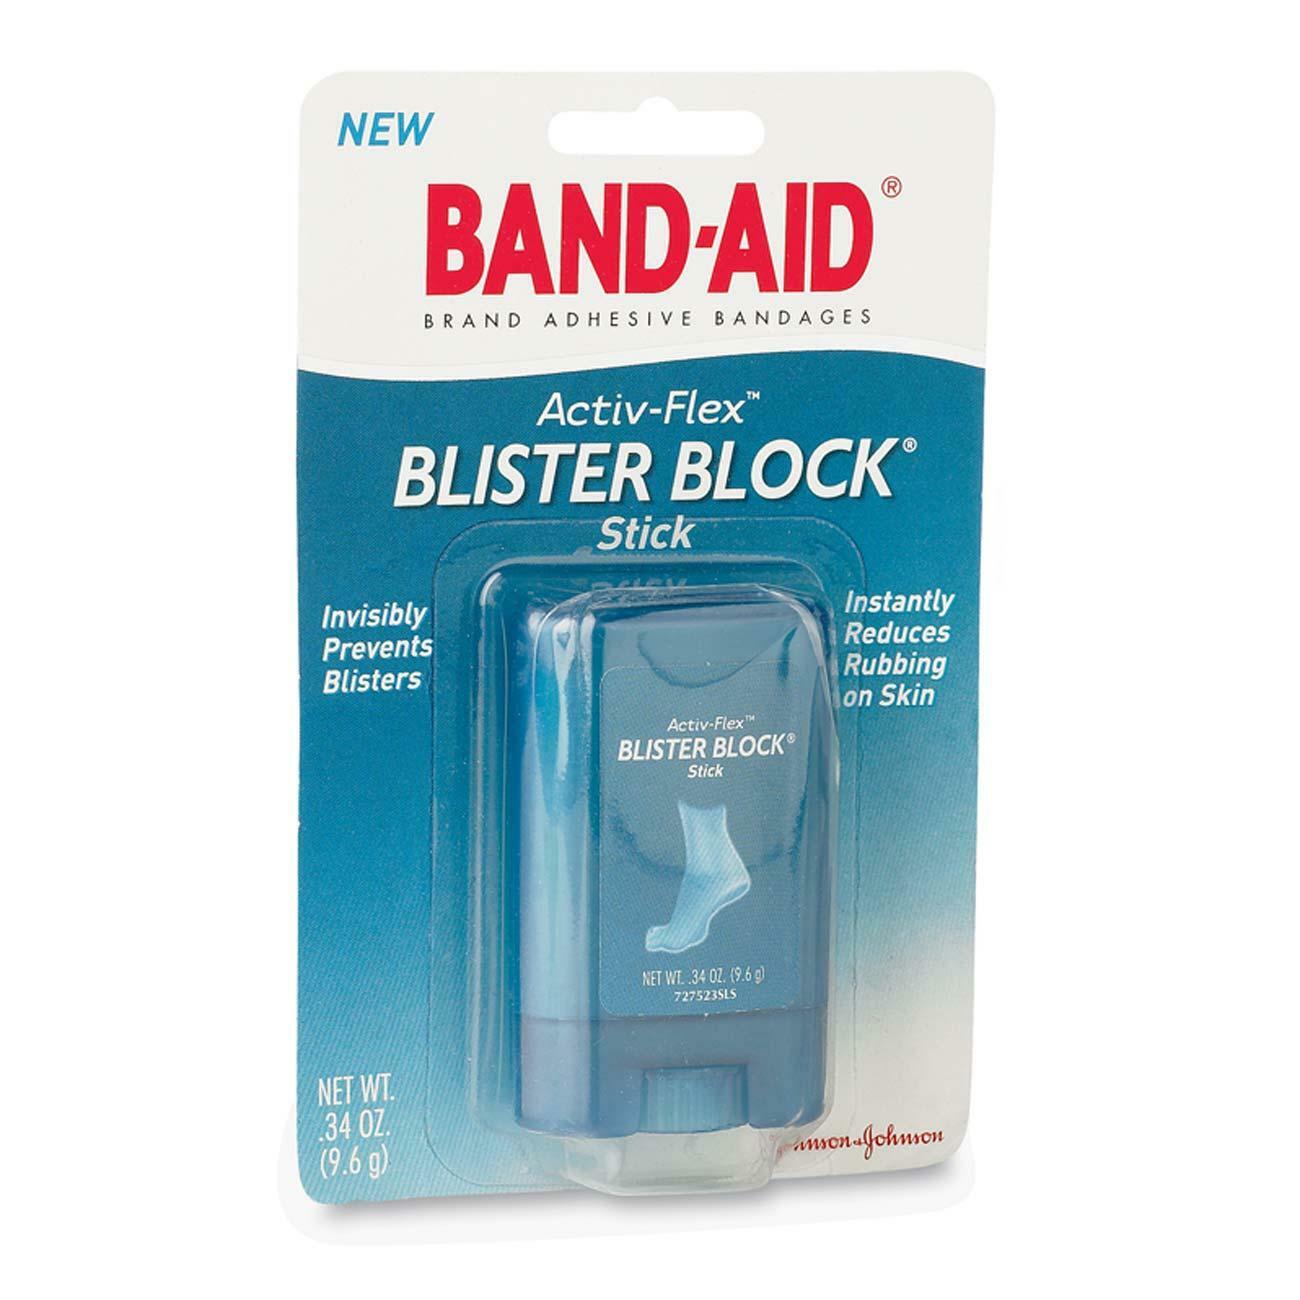 Band-Aid Blister Block Stick - image 1 of 2